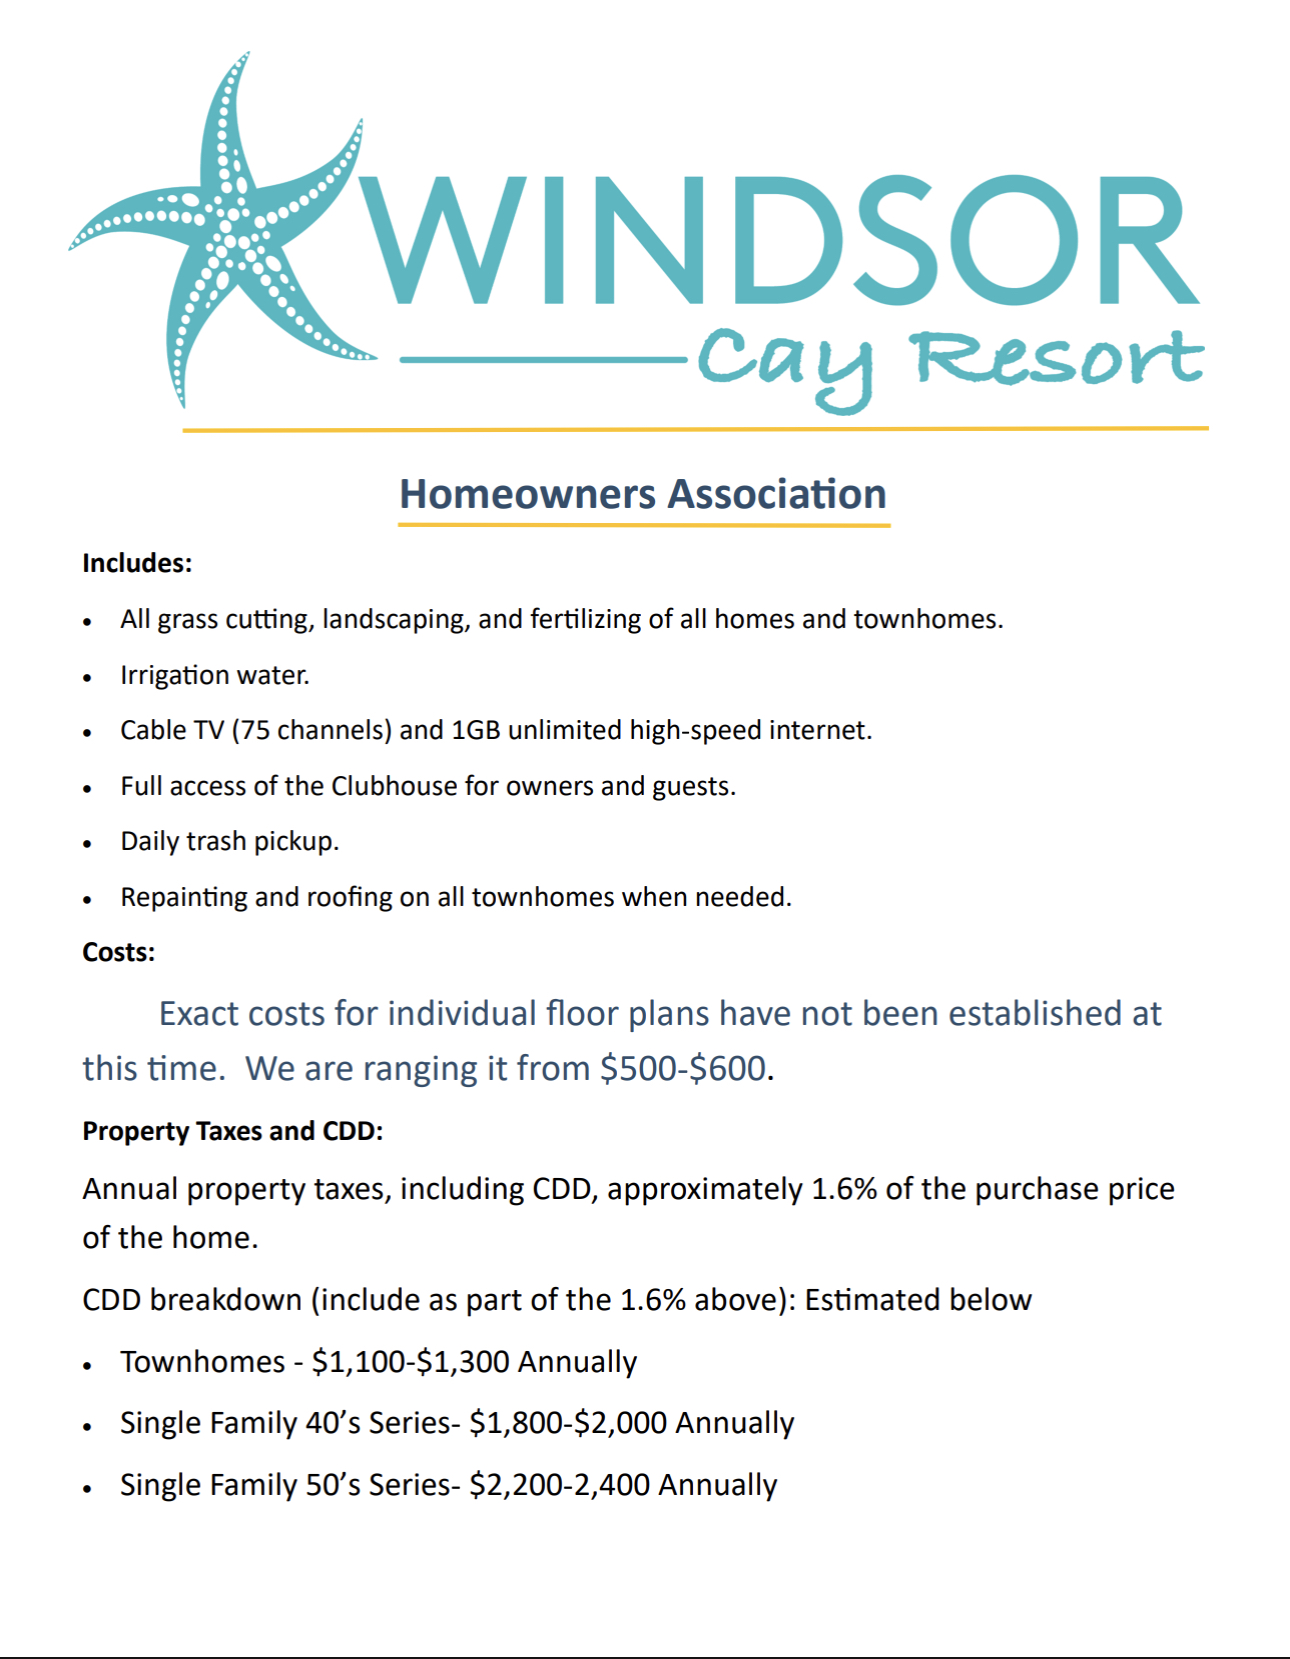 Your Ultimate Guide to Buying a Home in Windsor Cay Resort: Everything You Need to Know About the Windsor Cay Resort Homeowners Association